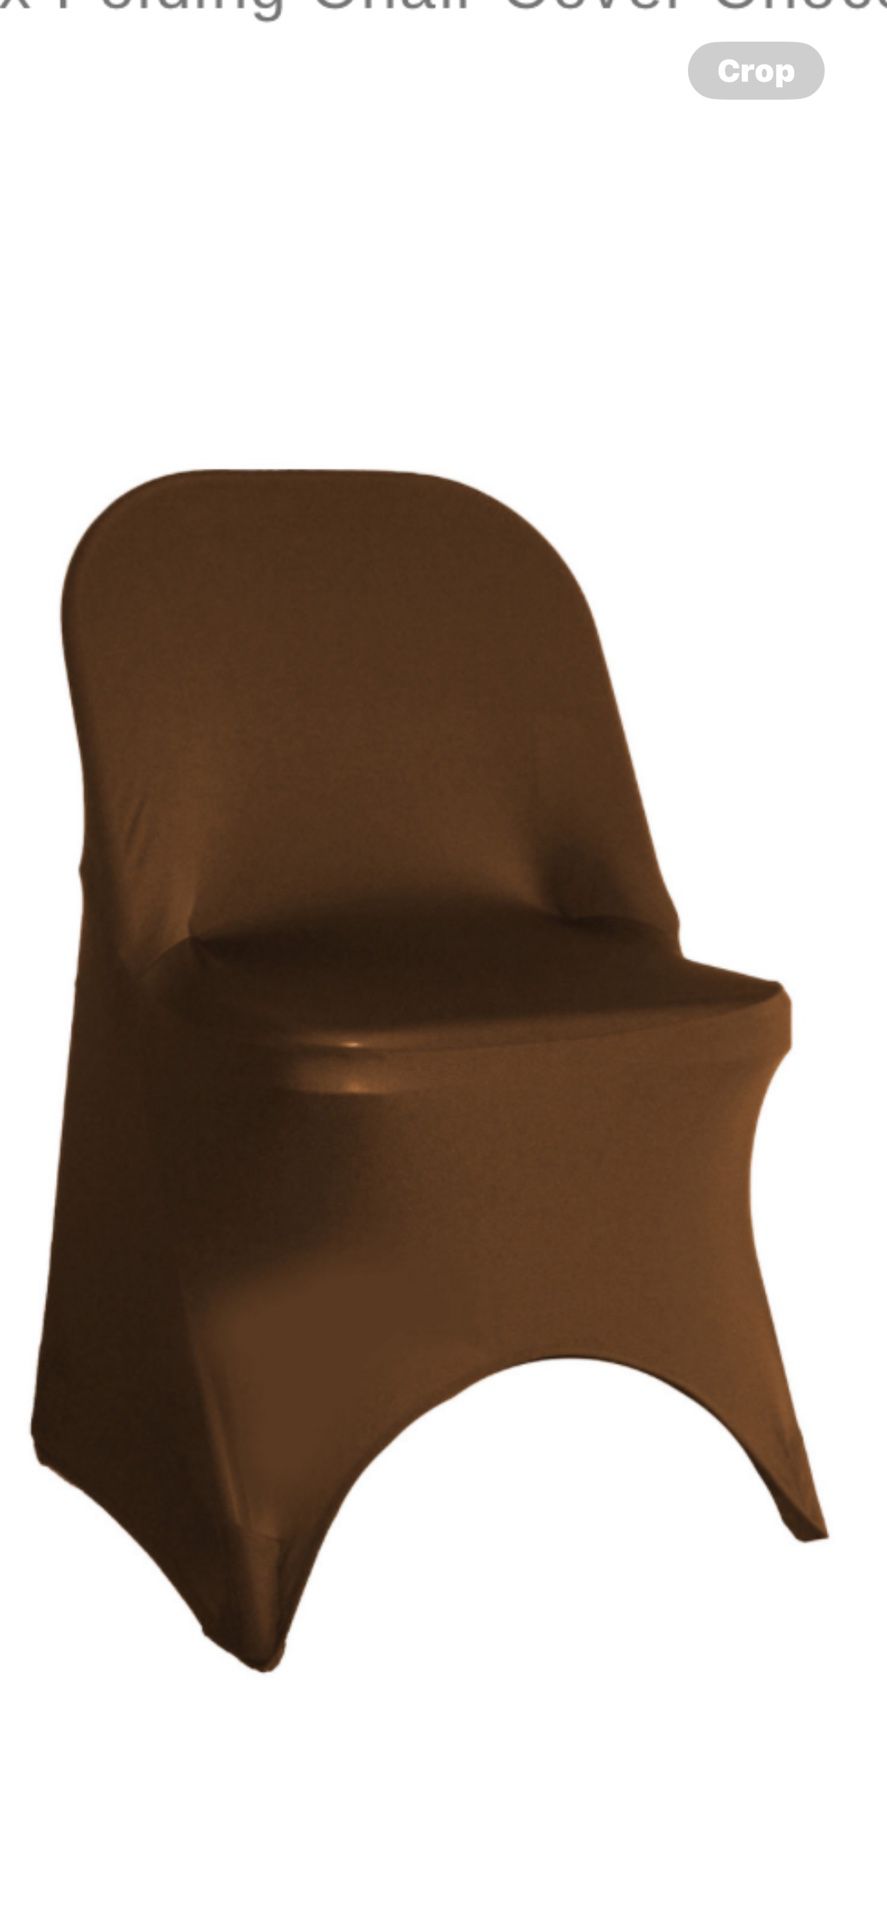 100 Brown Folding Chair Covers